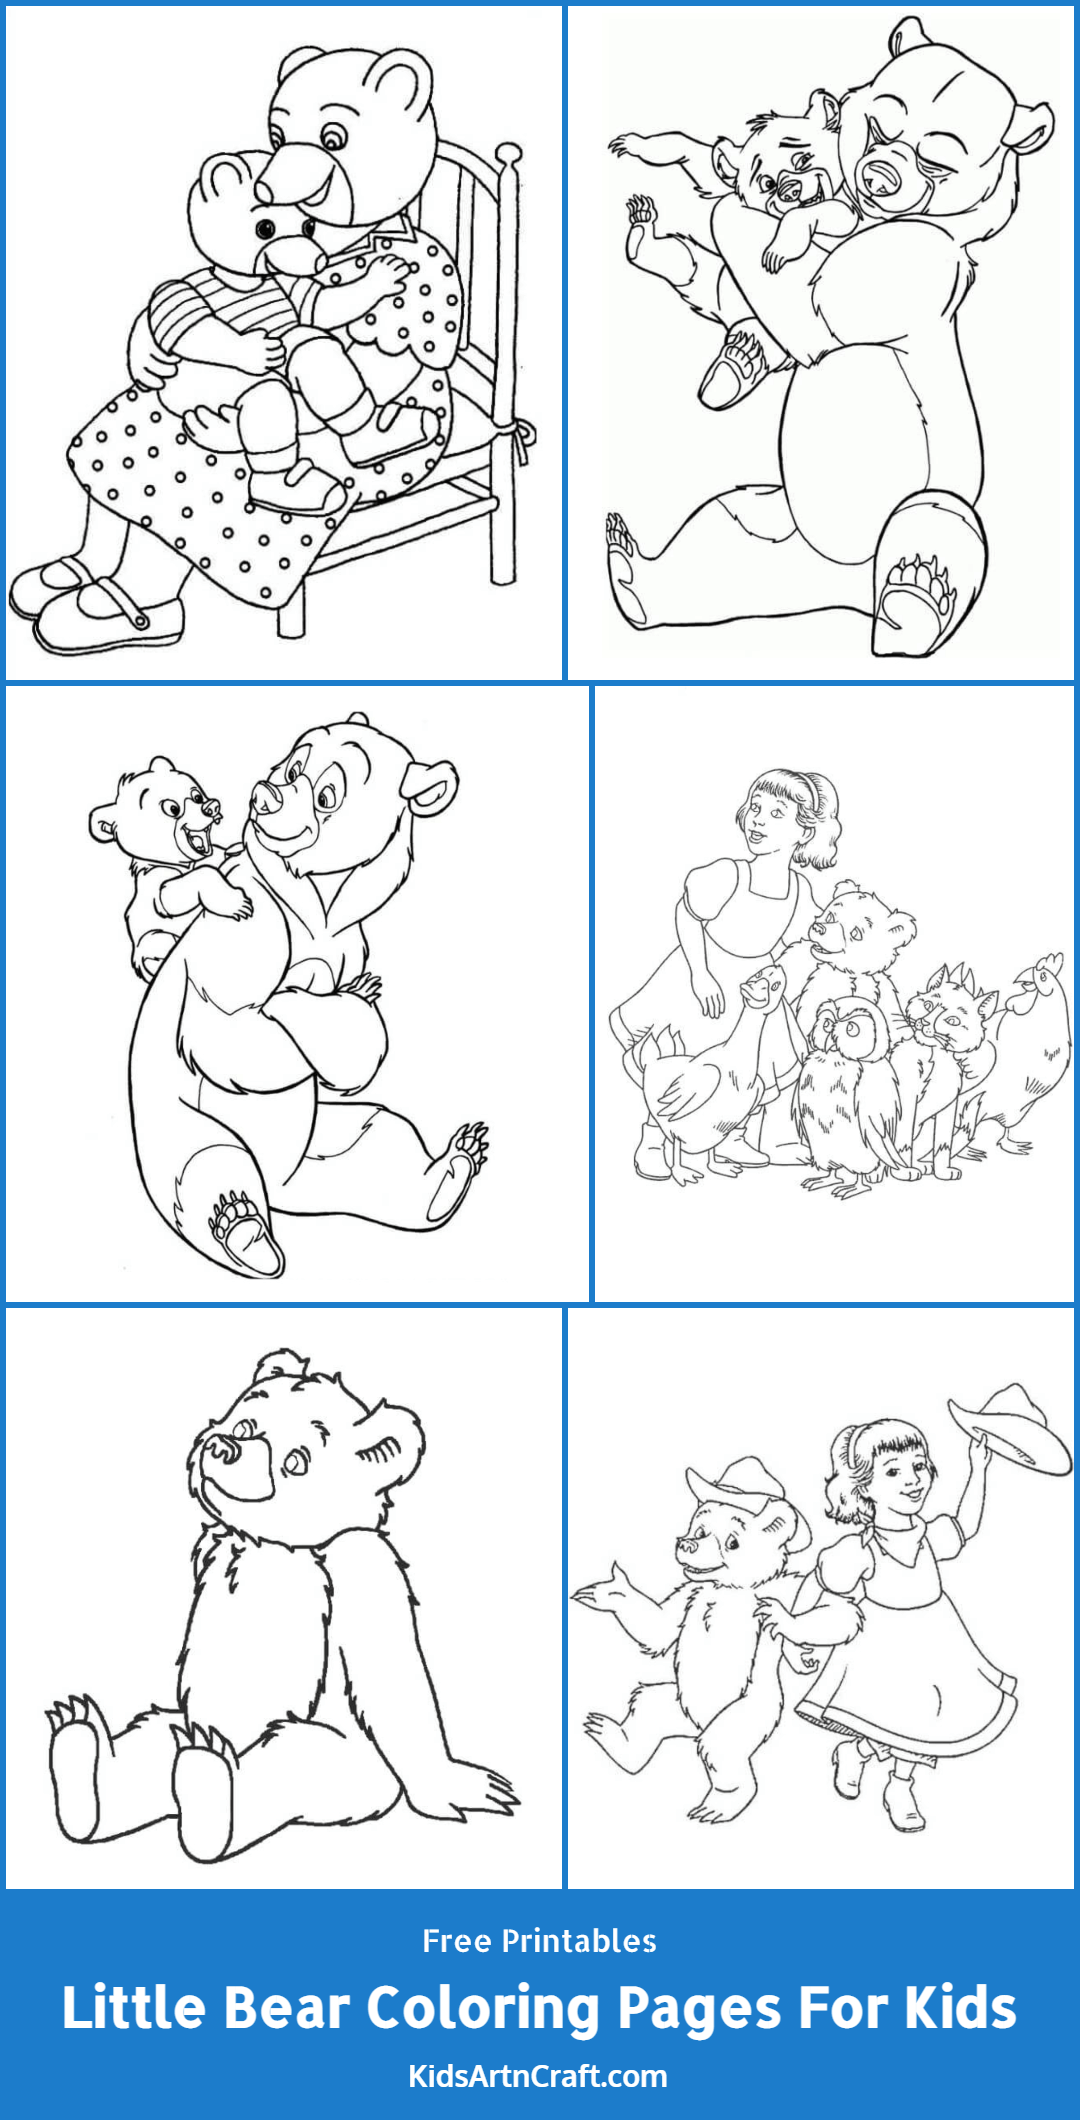 Little Bear Coloring Pages For Kids – Free Printables